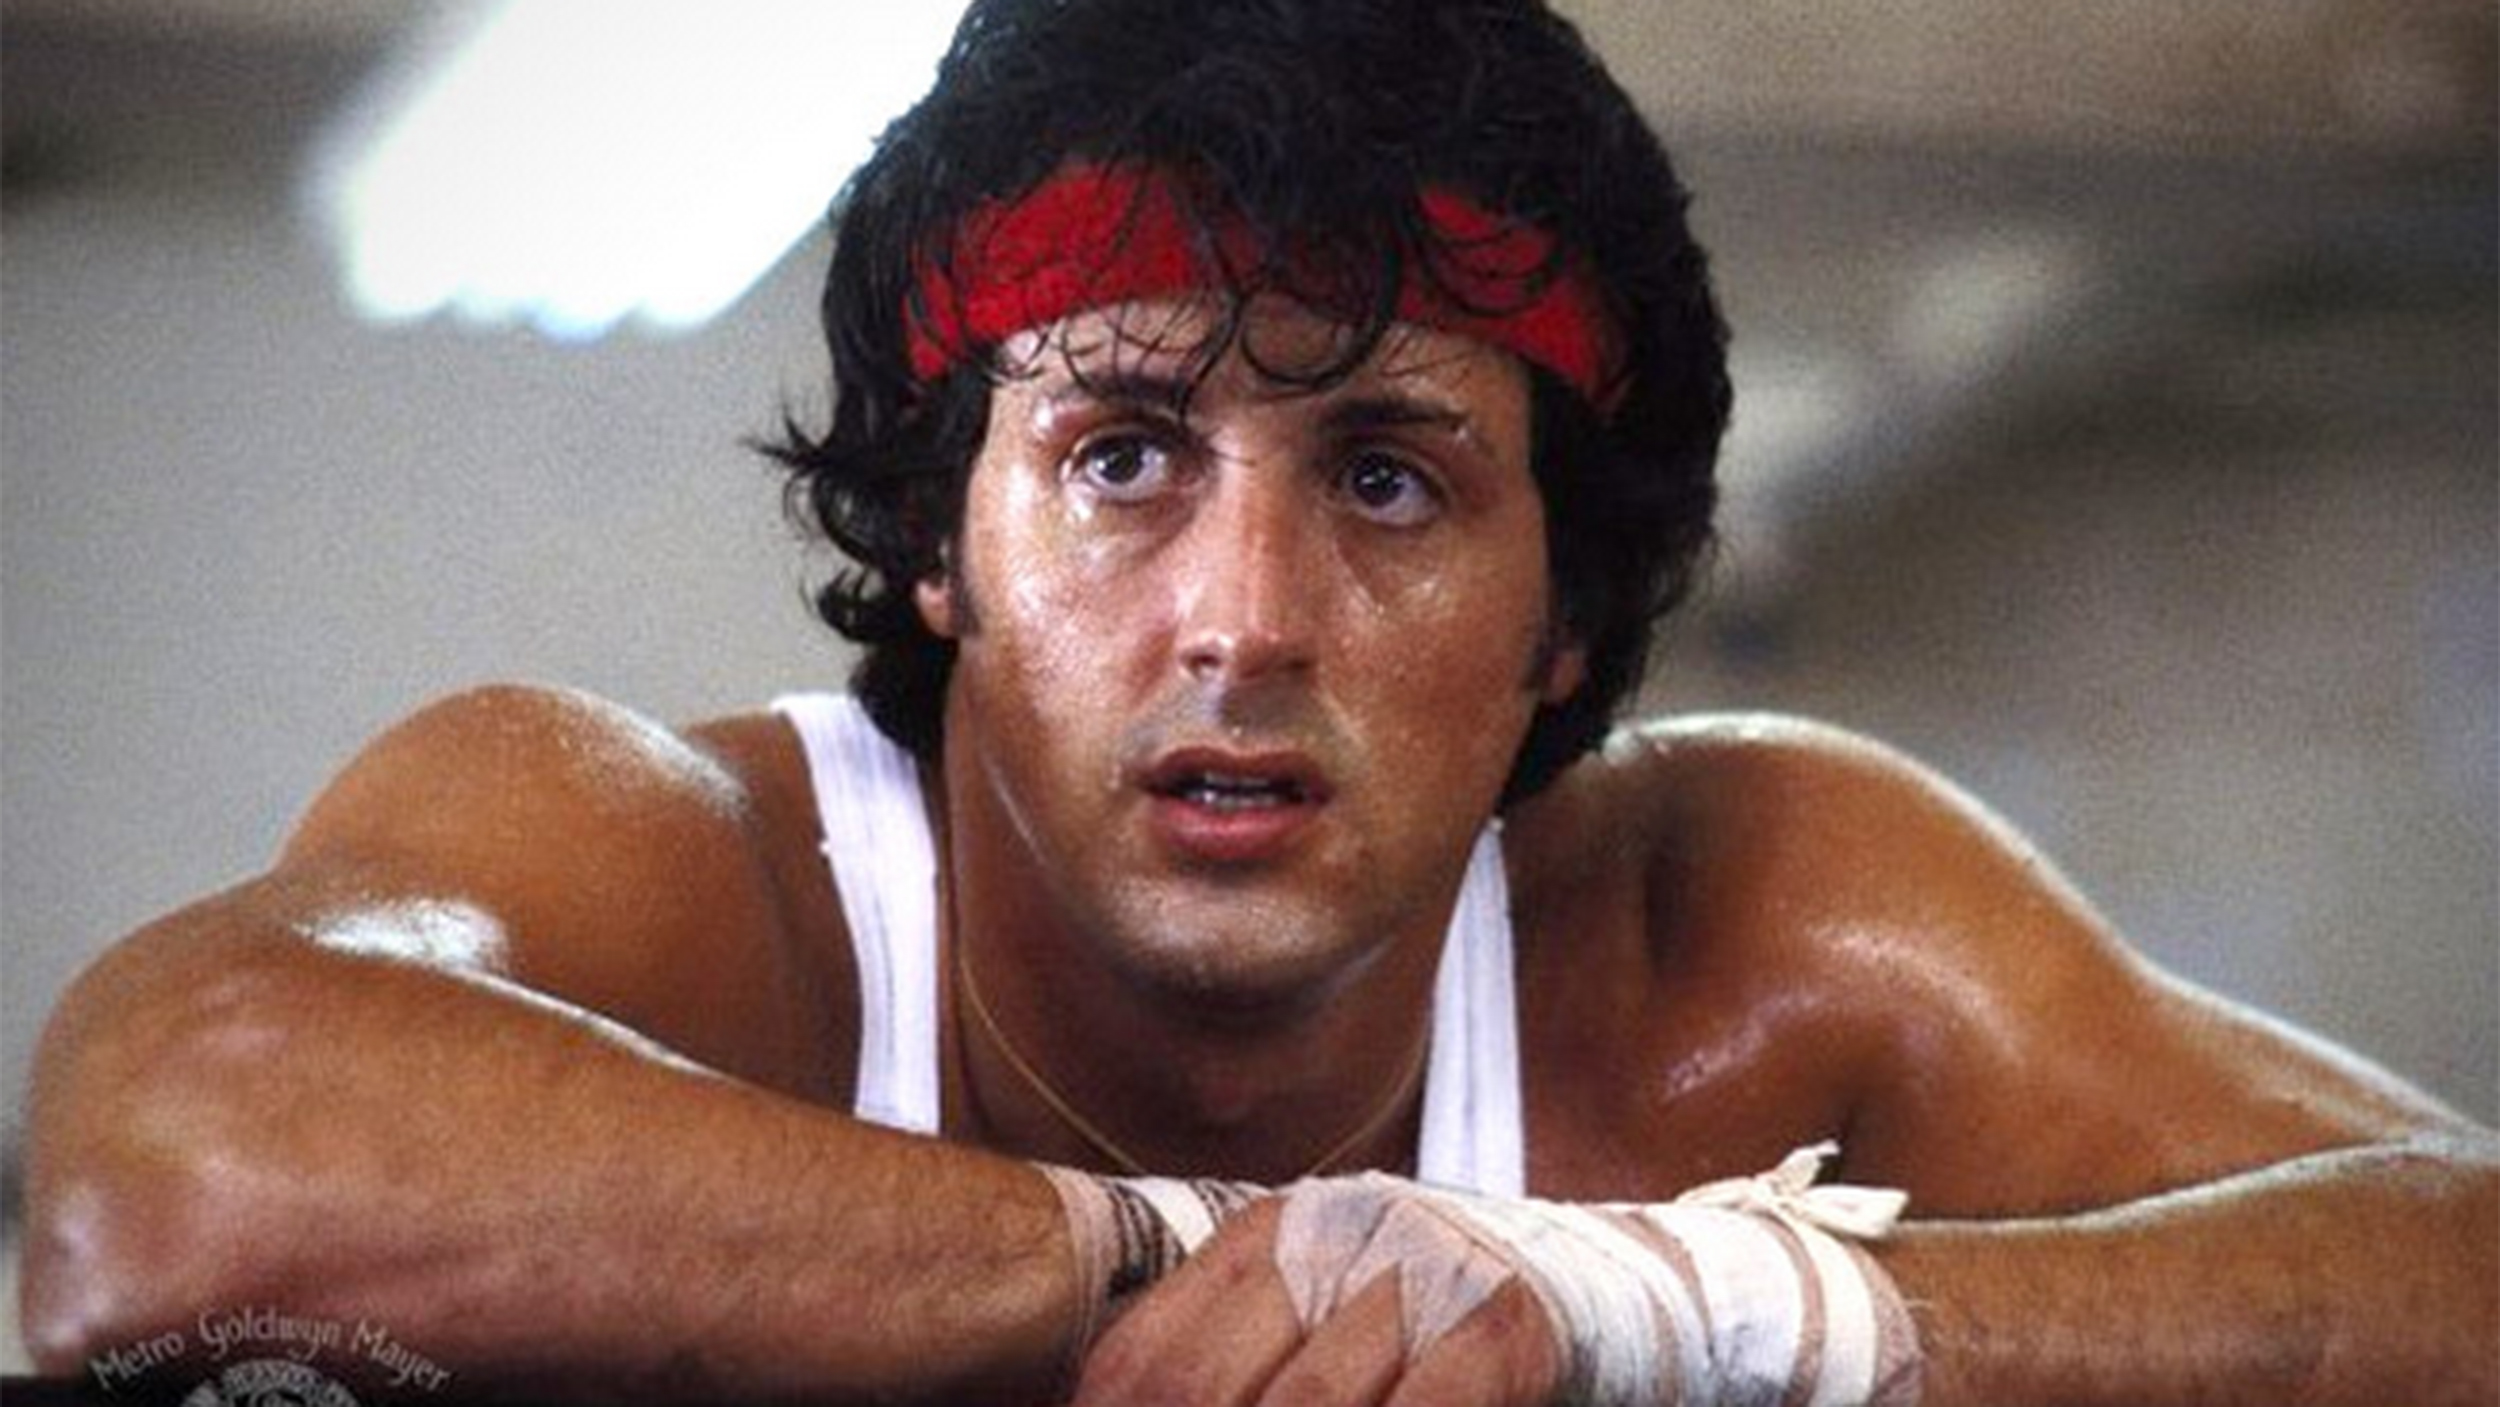 A sweaty Rocky leans forward wearing a red headband. His hands are wrapped in tape for boxing. 